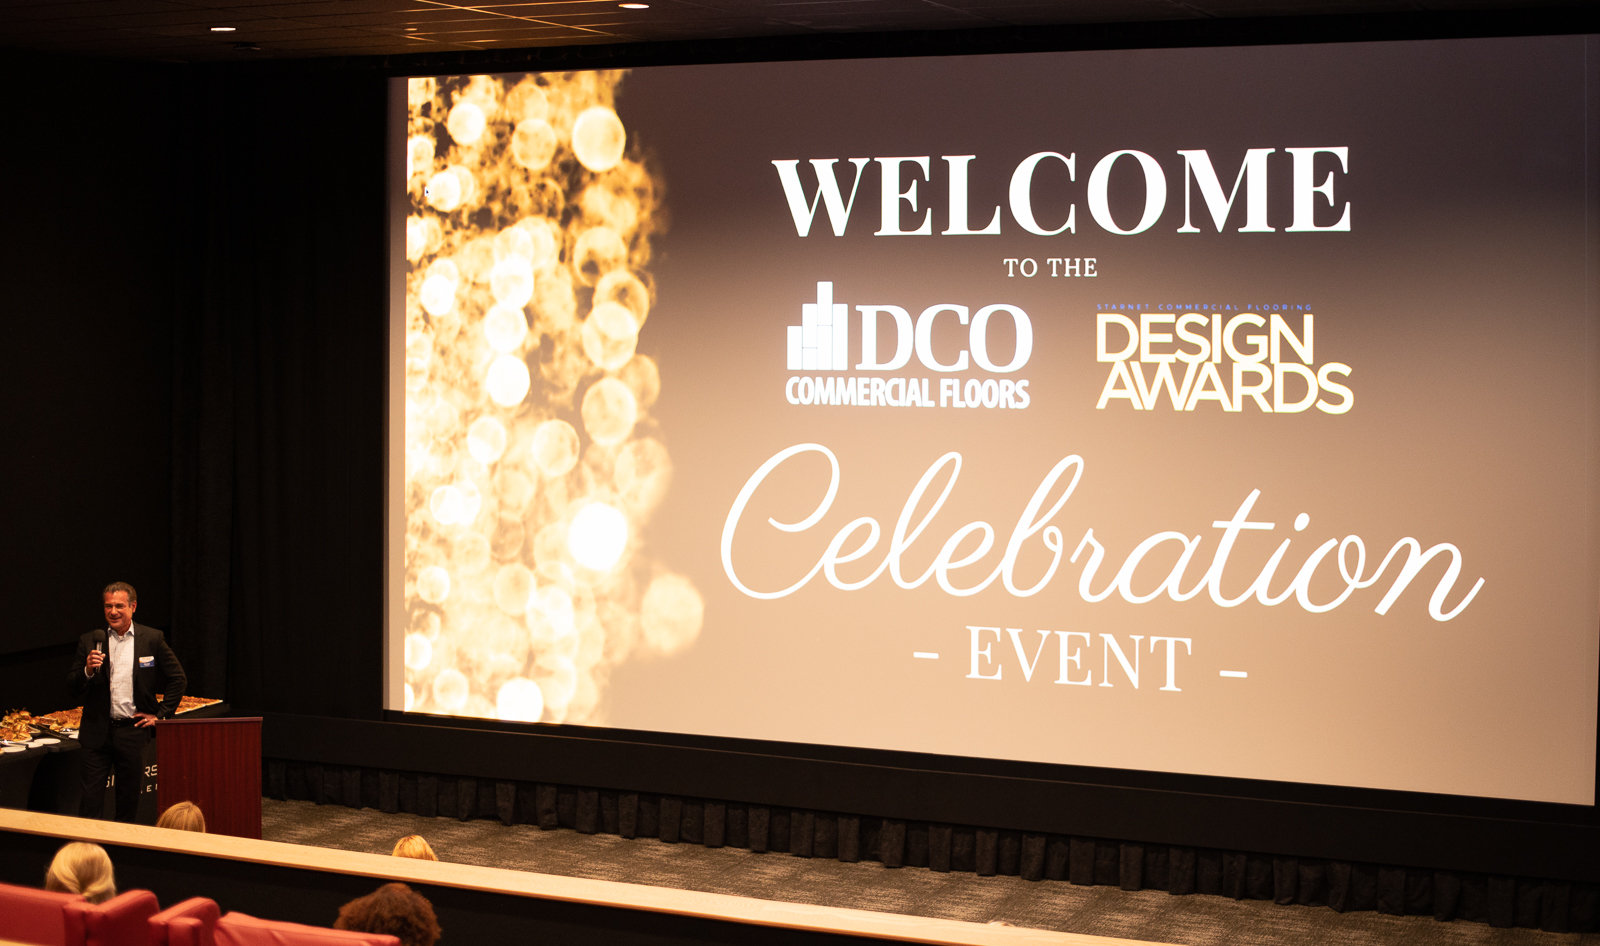 Starnet Design Awards Ceremony Hosted By Dco Commercial Floors Honors 5 Projects